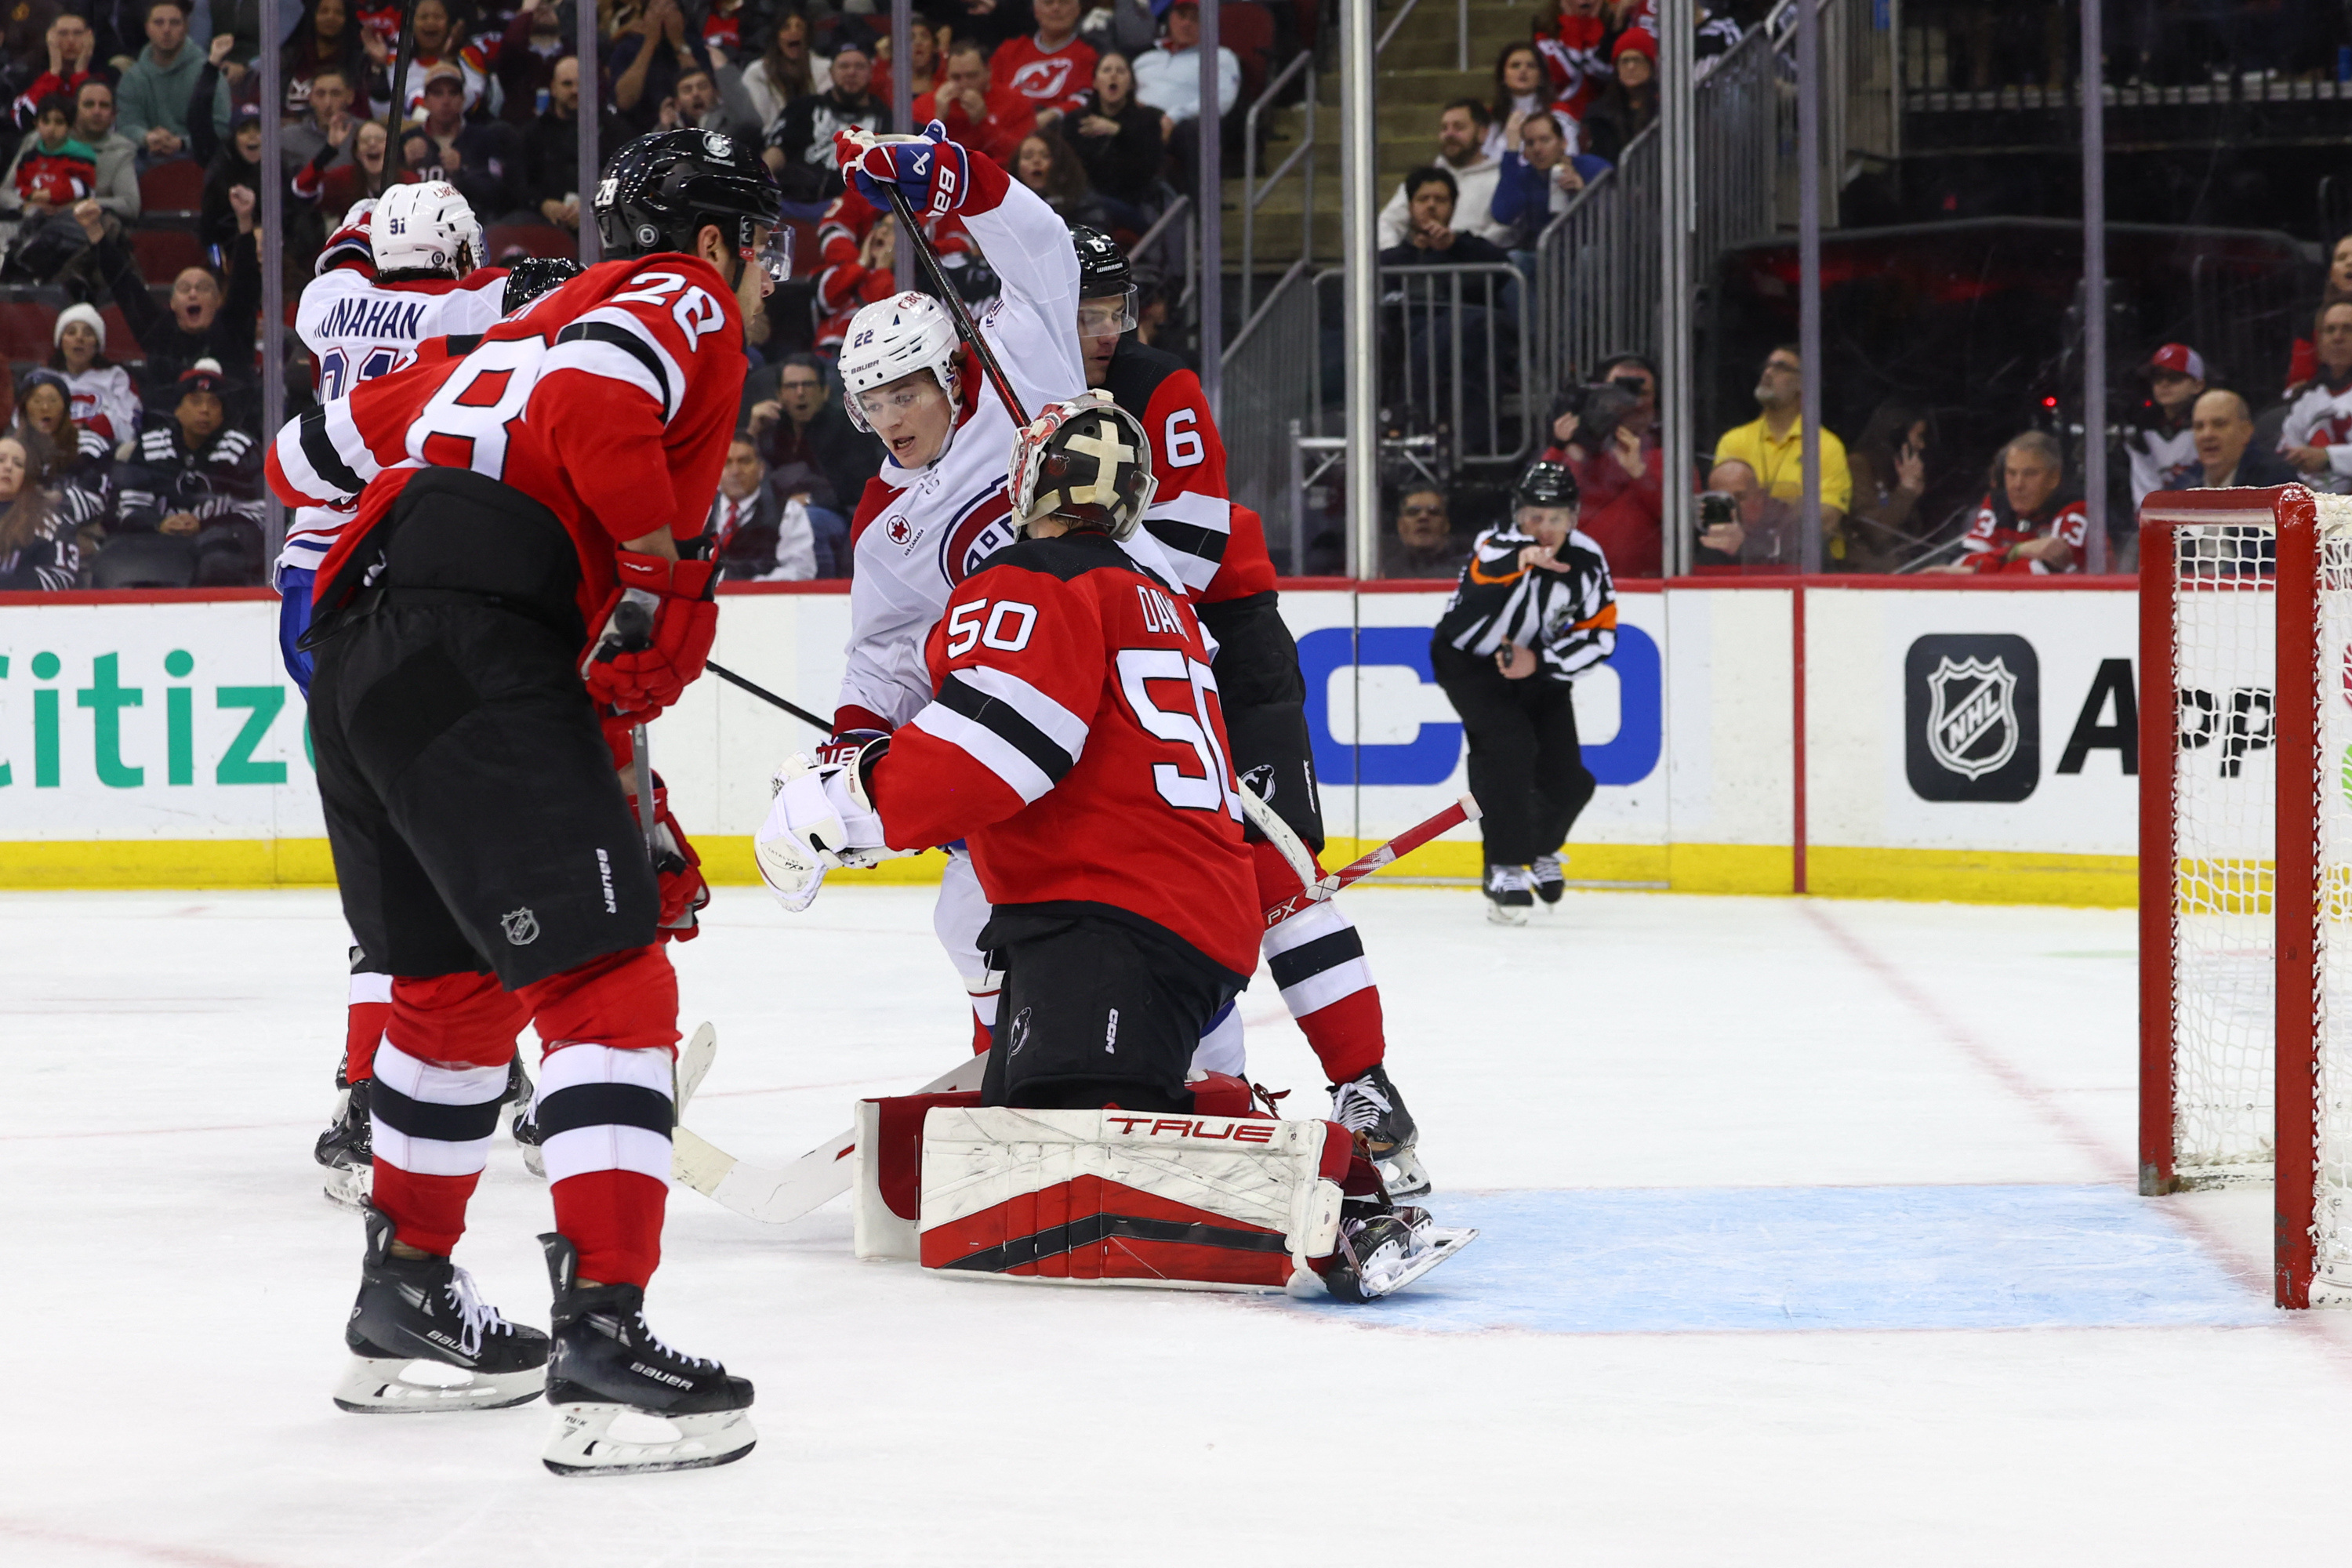 Devils rally, but Canadiens prevail on late goal | Reuters